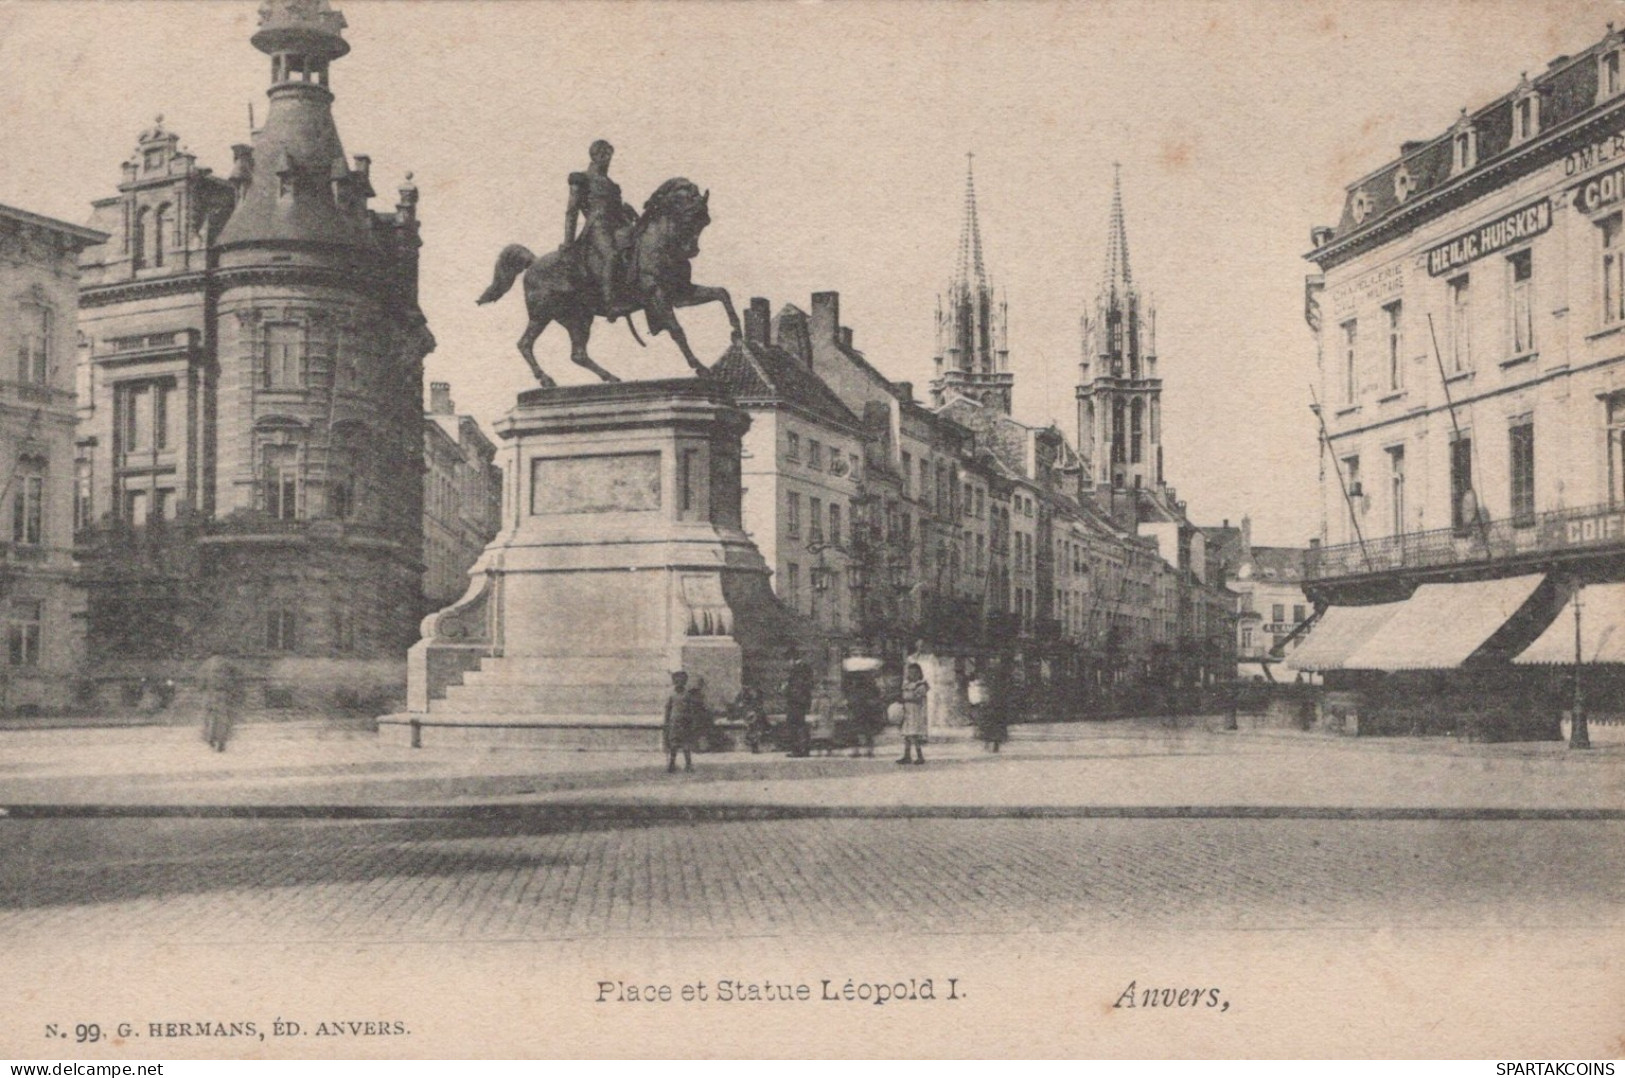 BÉLGICA AMBERES Postal CPA Unposted #PAD217.A - Antwerpen